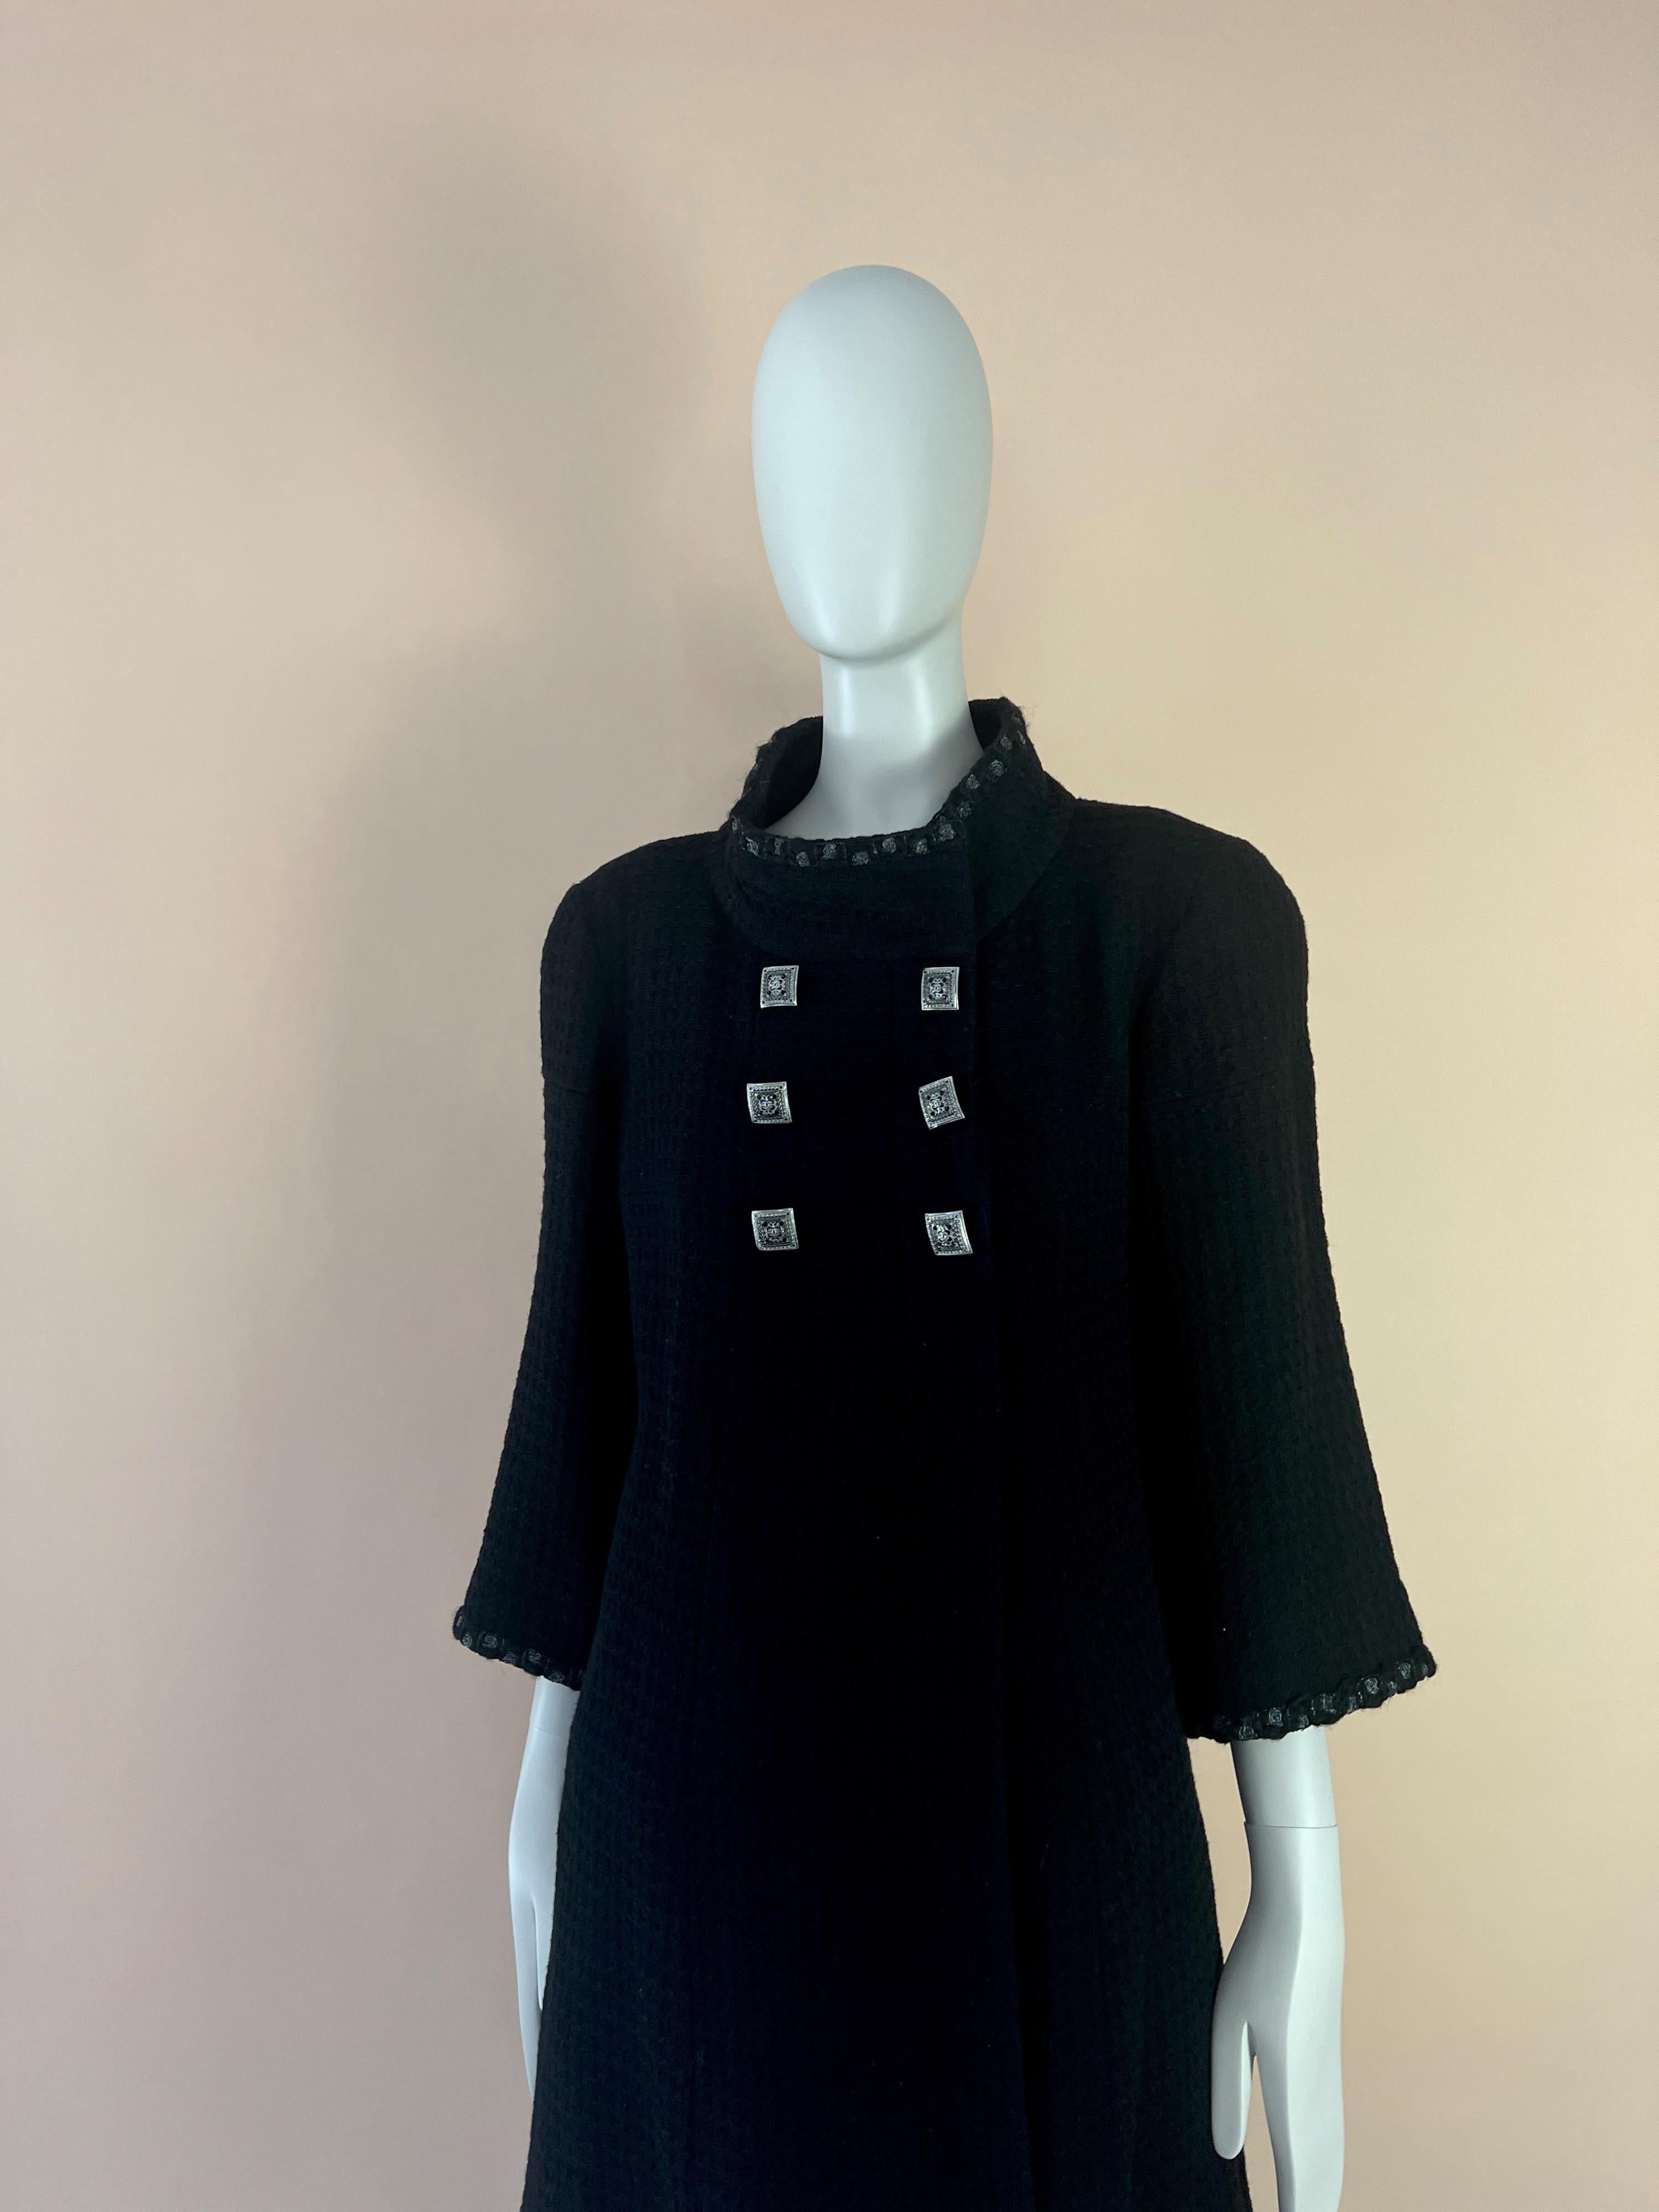 Chanel Byzance Collection Jewel Buttons Tweed Coat 5